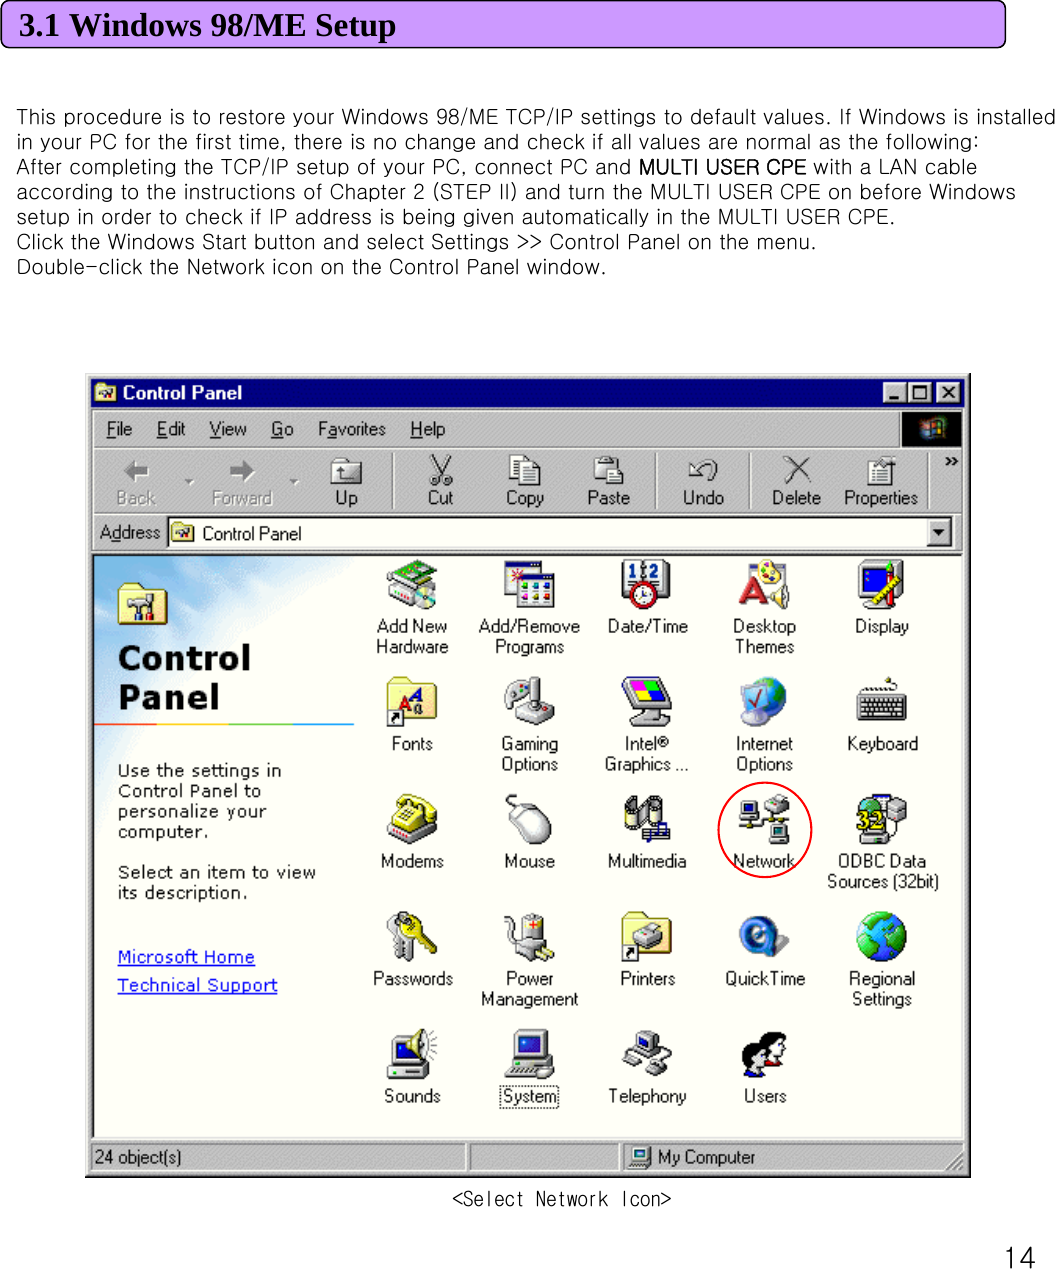 143.1 Windows 98/ME SetupThis procedure is to restore your Windows 98/ME TCP/IP settings to default values. If Windows is installed in your PC for the first time, there is no change and check if all values are normal as the following: After completing the TCP/IP setup of your PC, connect PC and MULTI USER CPE with a LAN cable according to the instructions of Chapter 2 (STEP II) and turn the MULTI USER CPE on before Windows setup in order to check if IP address is being given automatically in the MULTI USER CPE. Click the Windows Start button and select Settings &gt;&gt; Control Panel on the menu. Double-click the Network icon on the Control Panel window. &lt;Select Network Icon&gt;